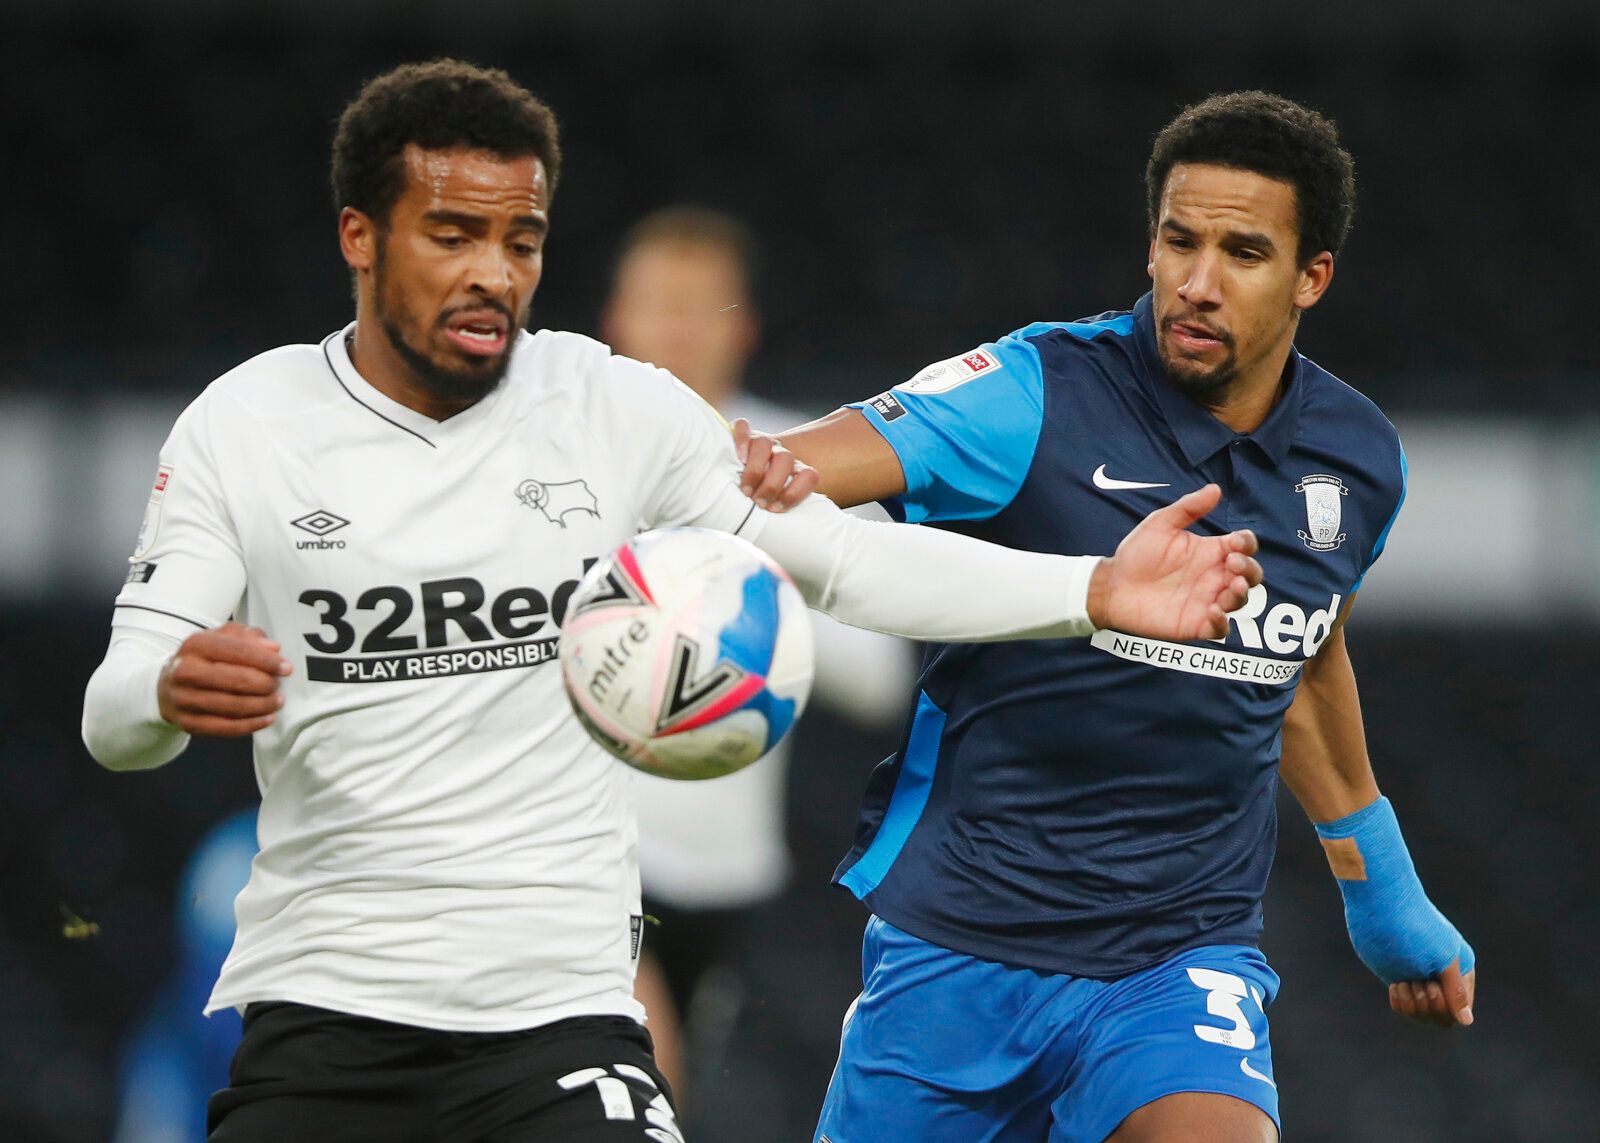 Soccer Football - Championship - Derby County v Preston North End - Pride Park, Derby, Britain - December 26, 2020 Preston North End's Scott Sinclair in action with Derby County's Nathan Byrne Action Images/Molly Darlington EDITORIAL USE ONLY. No use with unauthorized audio, video, data, fixture lists, club/league logos or 'live' services. Online in-match use limited to 75 images, no video emulation. No use in betting, games or single club /league/player publications.  Please contact your accoun